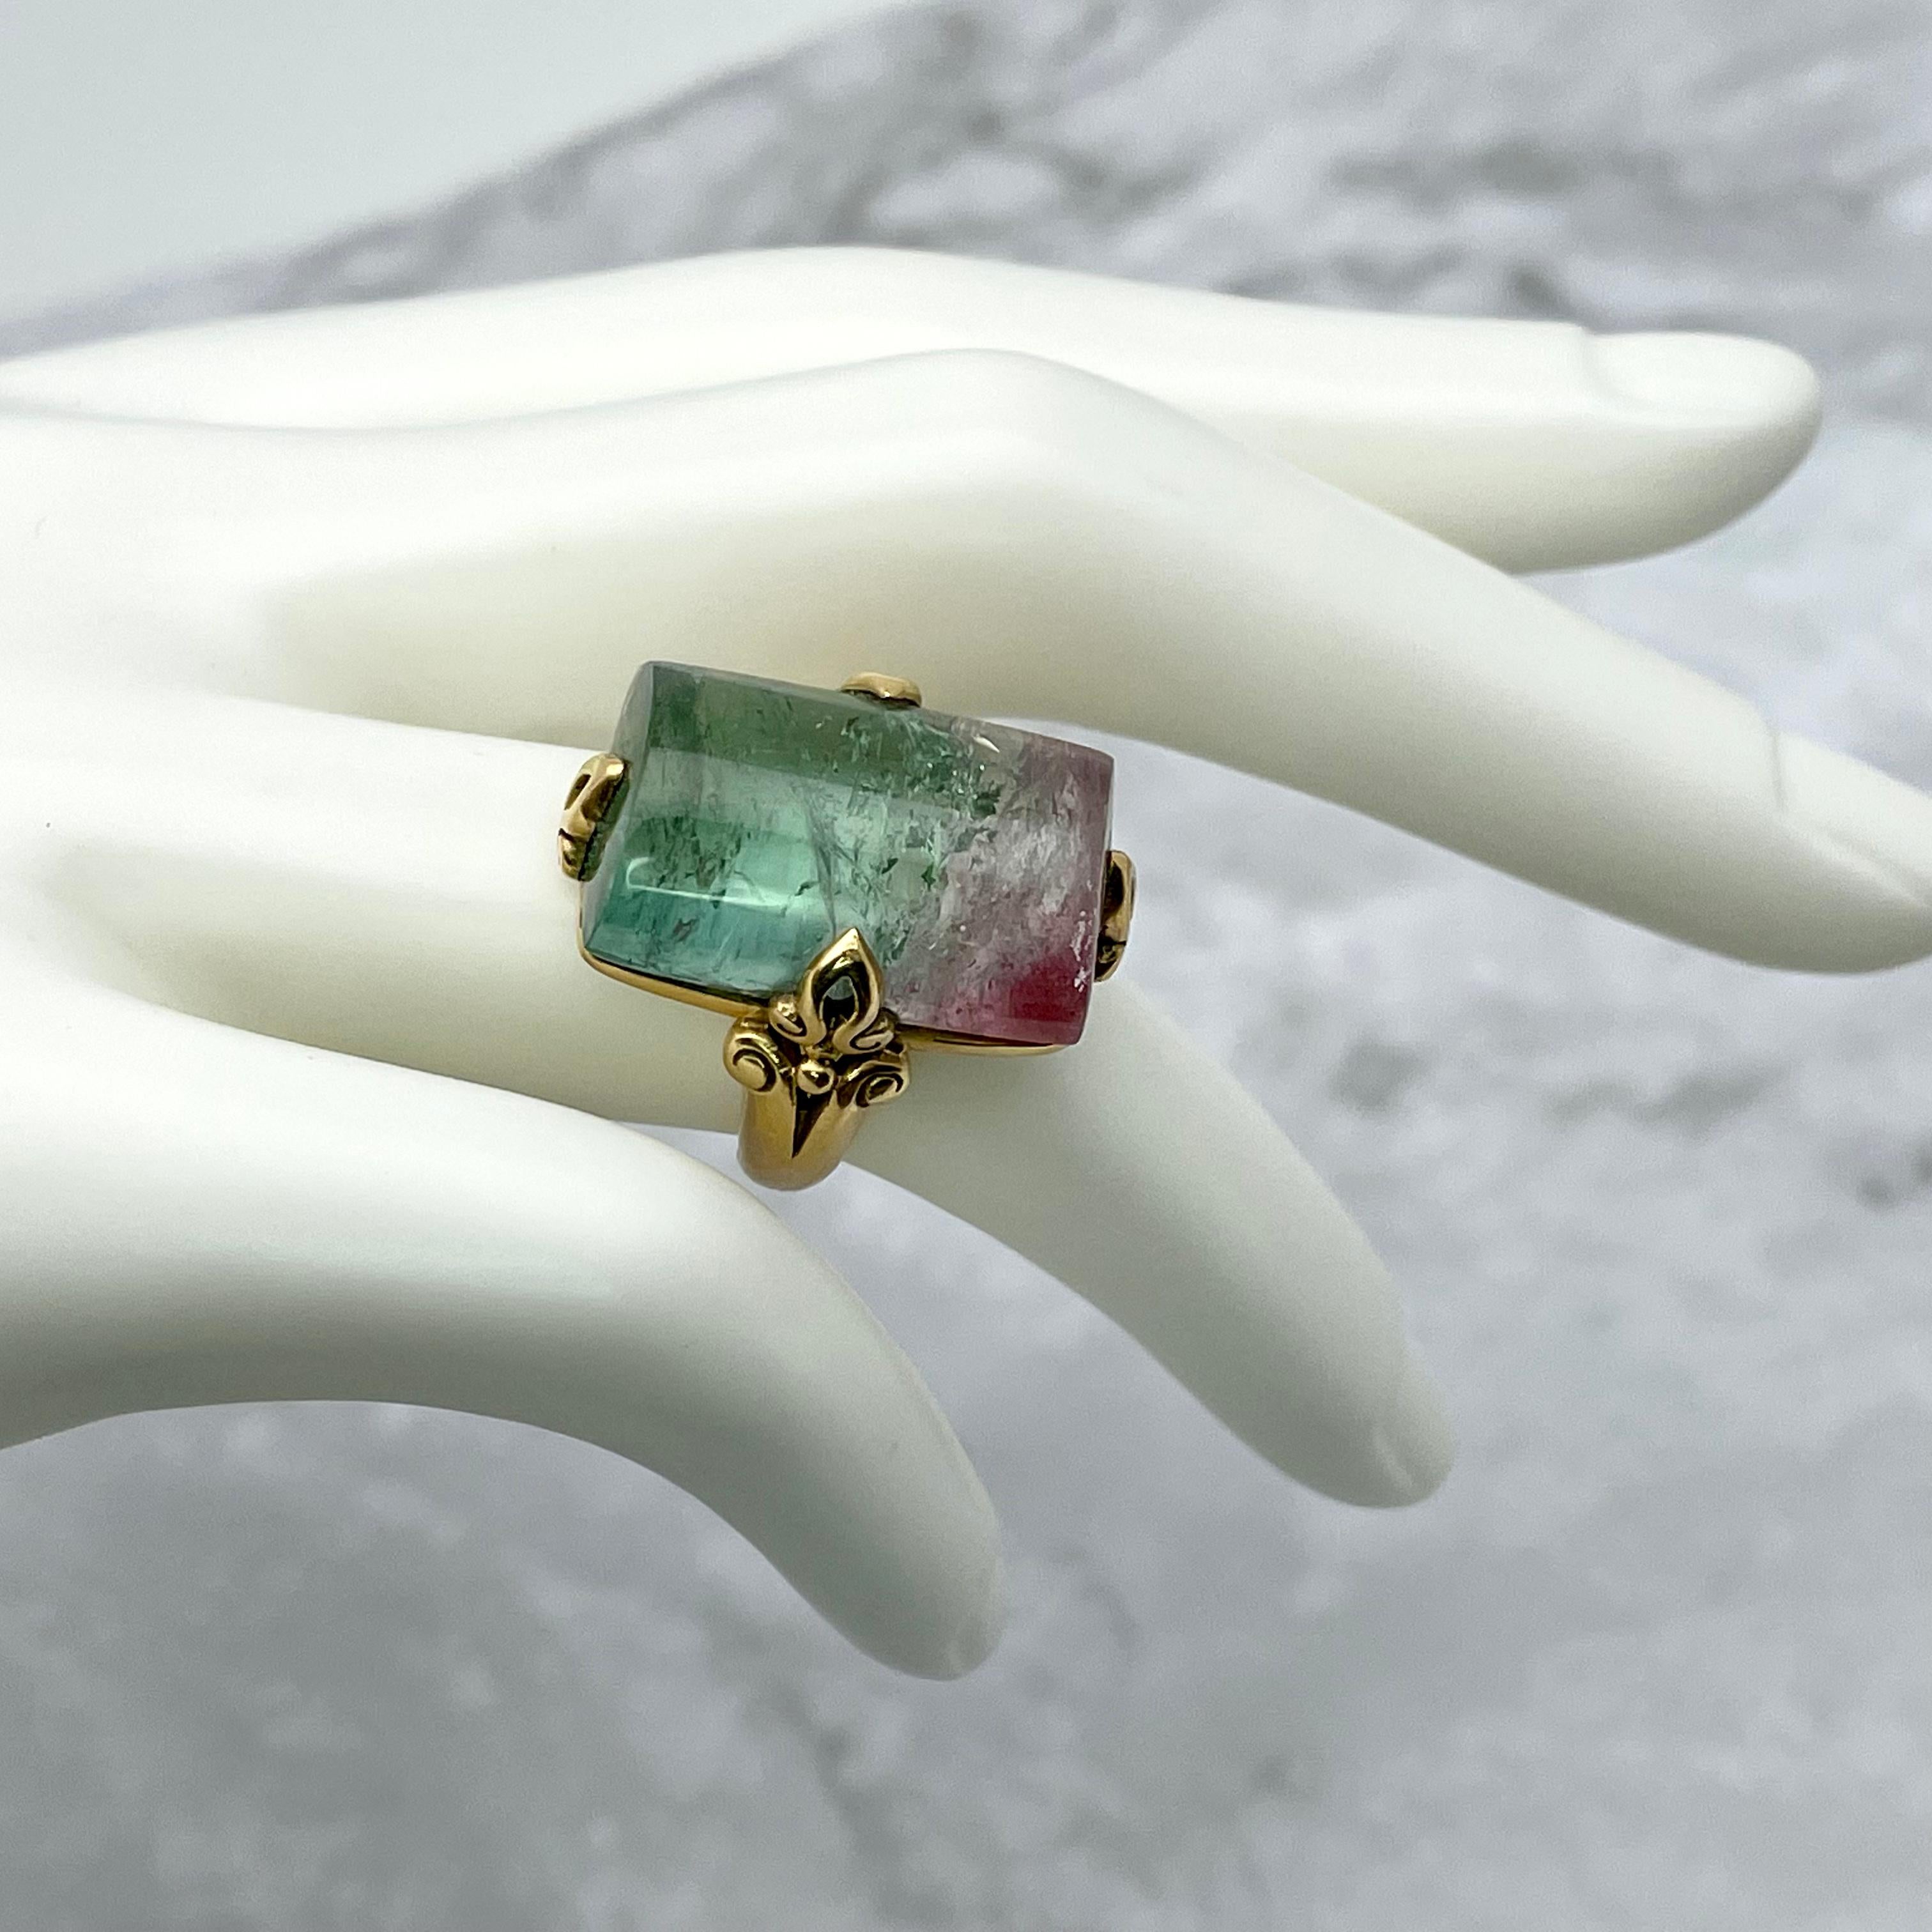 A vibrant half cylinder of cabochon watermelon tourmaline crystal is held by four carved 18K prongs atop an ancient-inspired double spiral matte finish gold shank.  This stone has beautiful shades of light green to pink with lots of internal